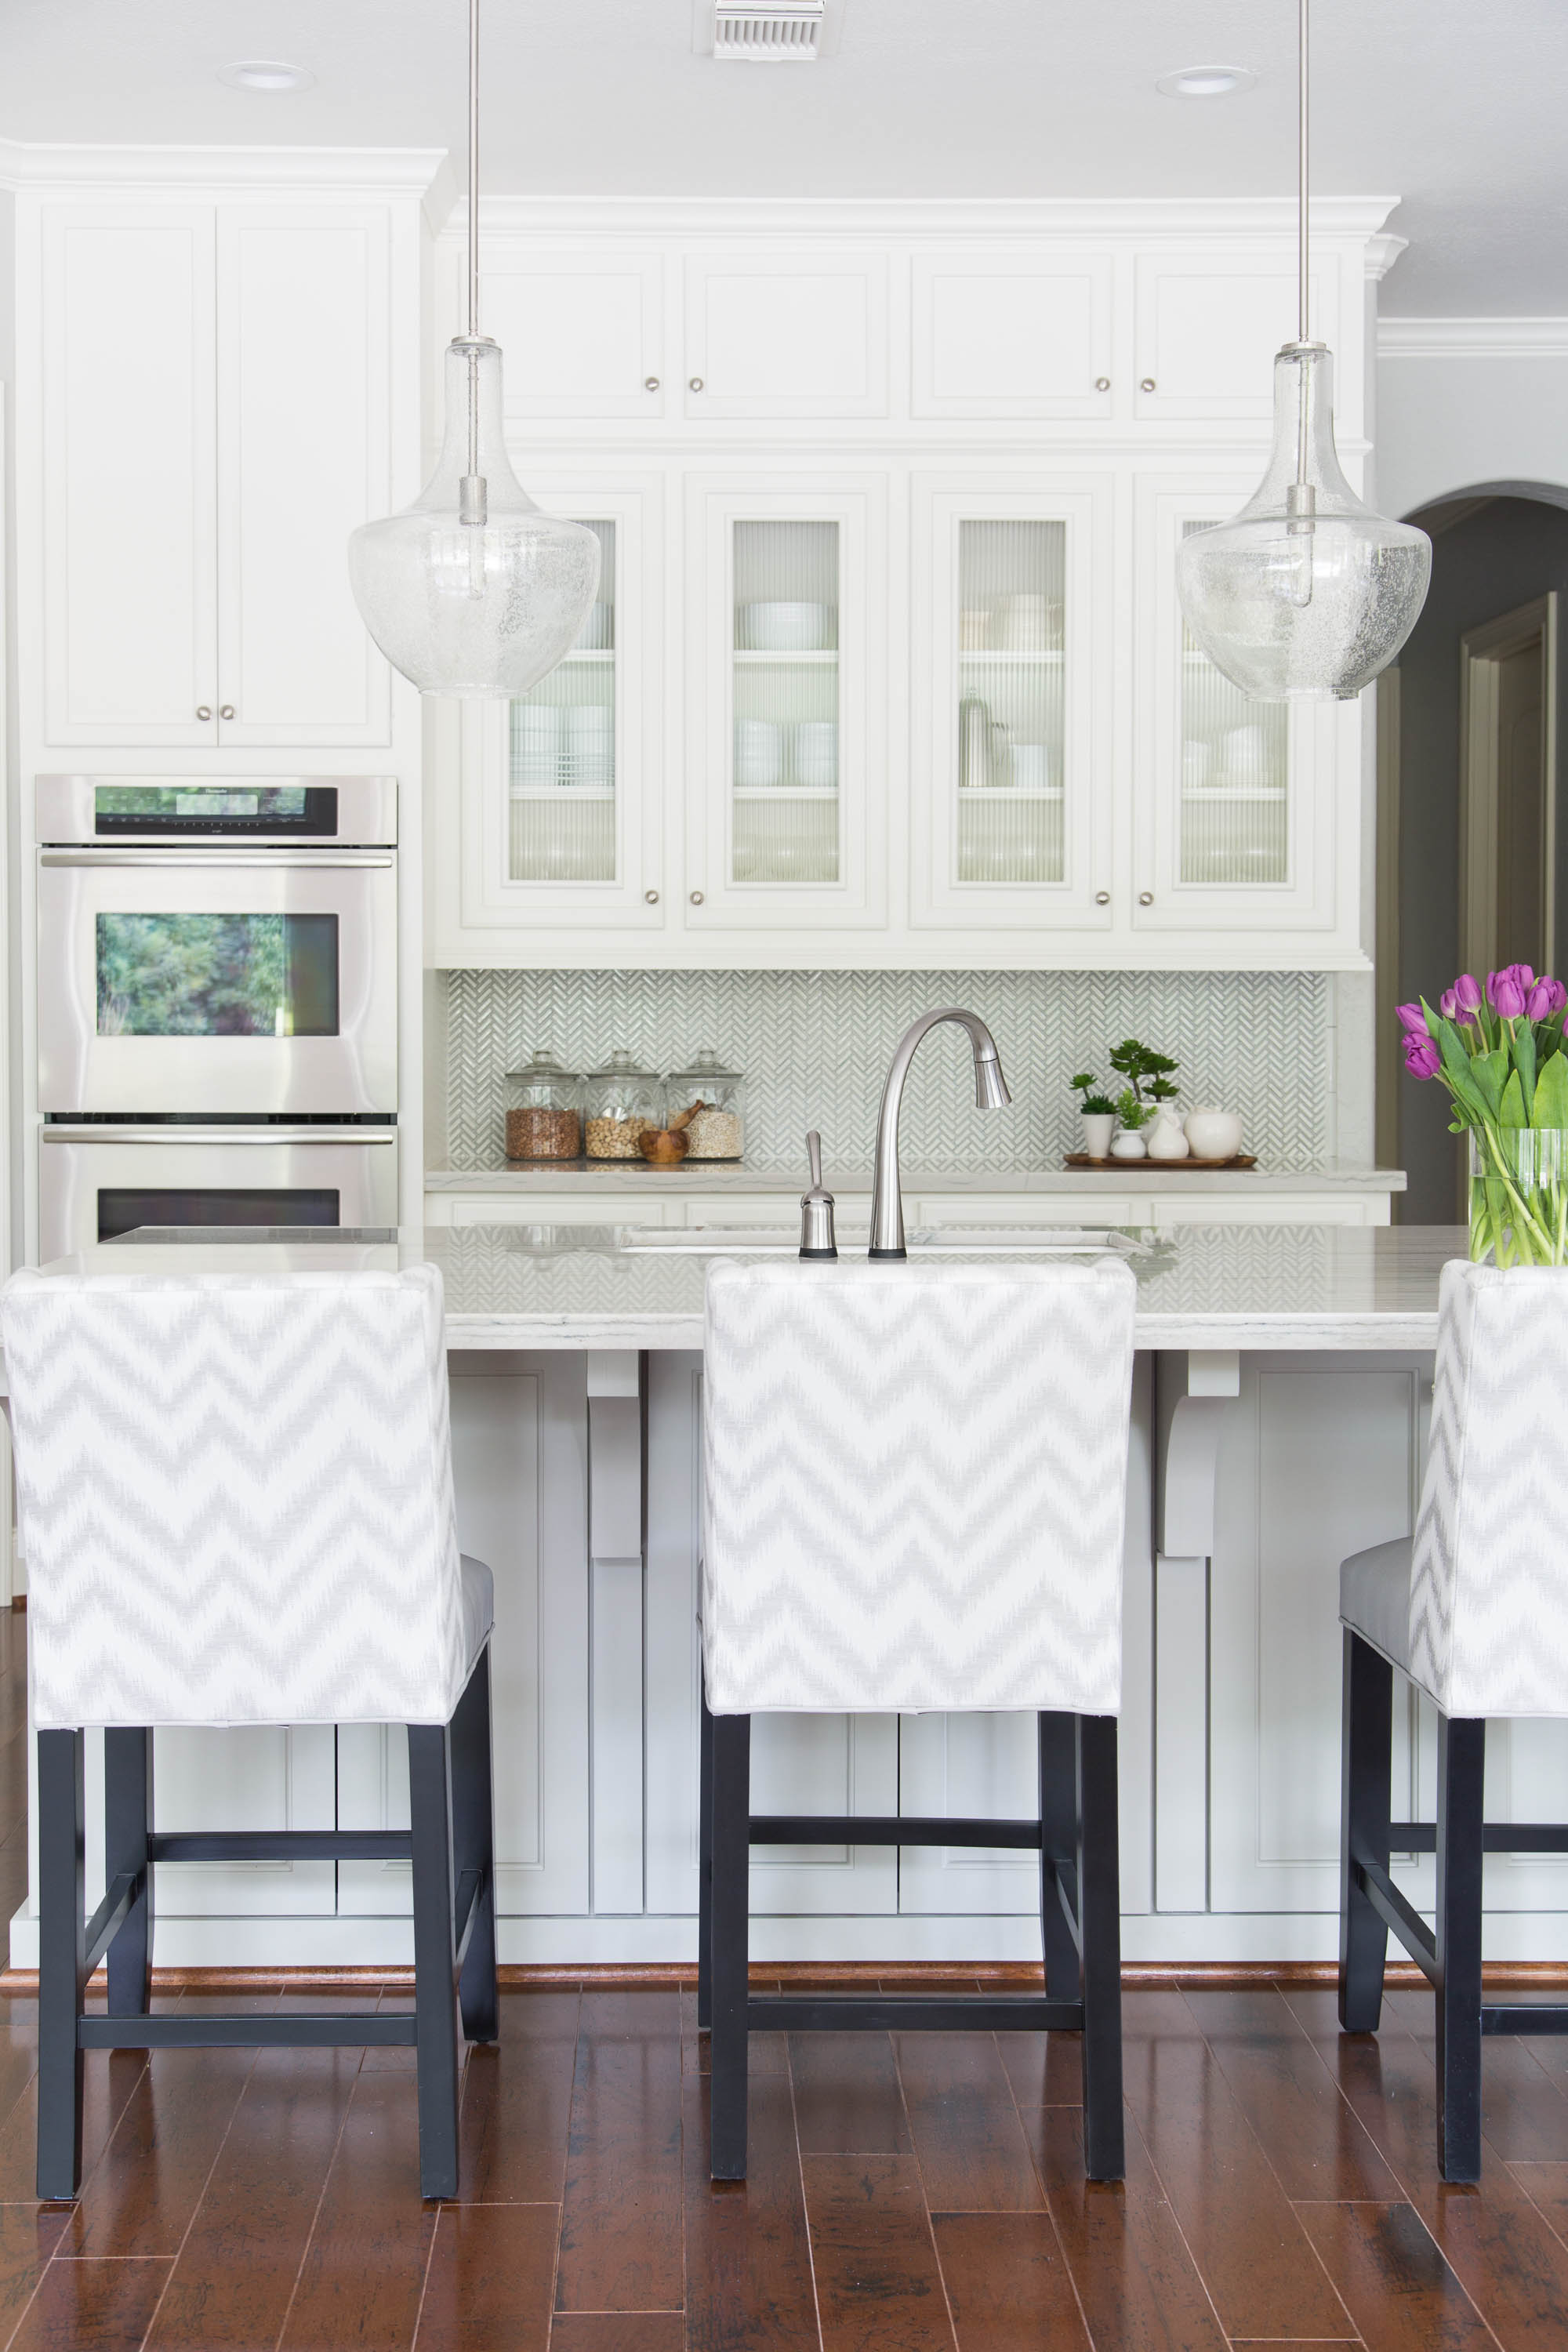 How Many Pendants Should You Hang Above Your Kitchen Island, Two Or Three?  — Designed